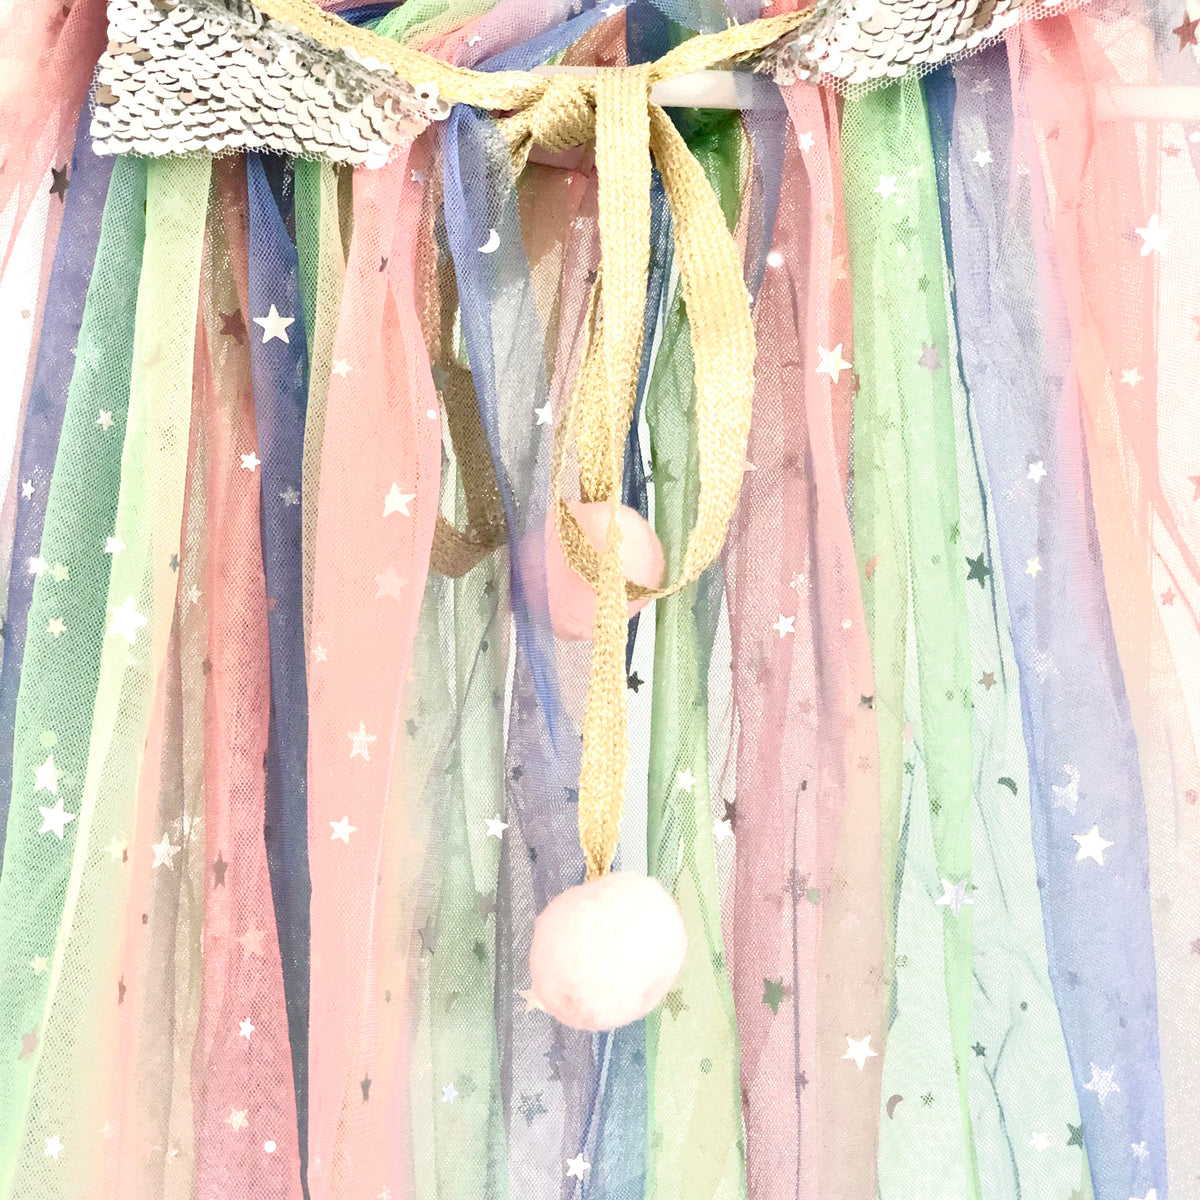 Kids Capes, Fairy Veil, Princess Cloak - Flower Girl, Birthday Party - 3, 4, 5, 6 year old Girl Gift